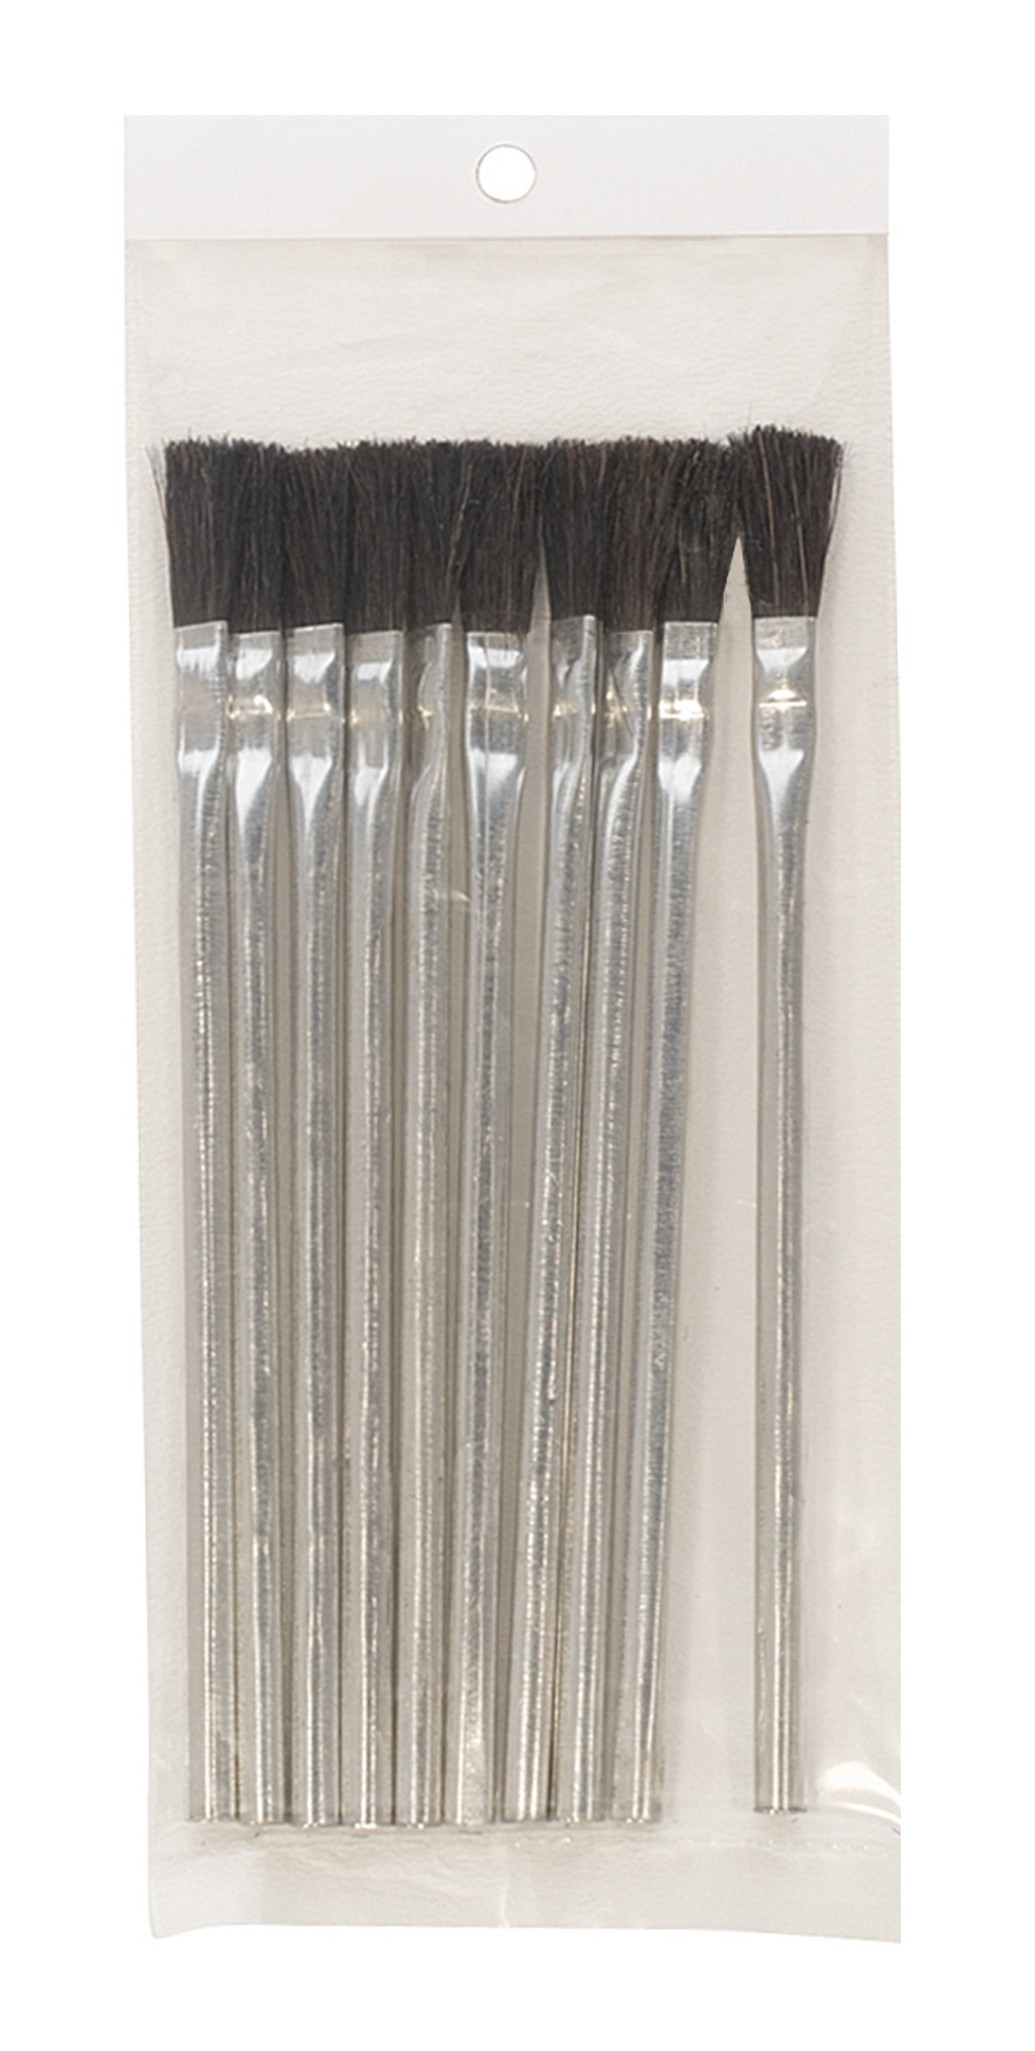 Pack of 12 Utility Multi-Purpose Flux Brushes , BRS-980.05